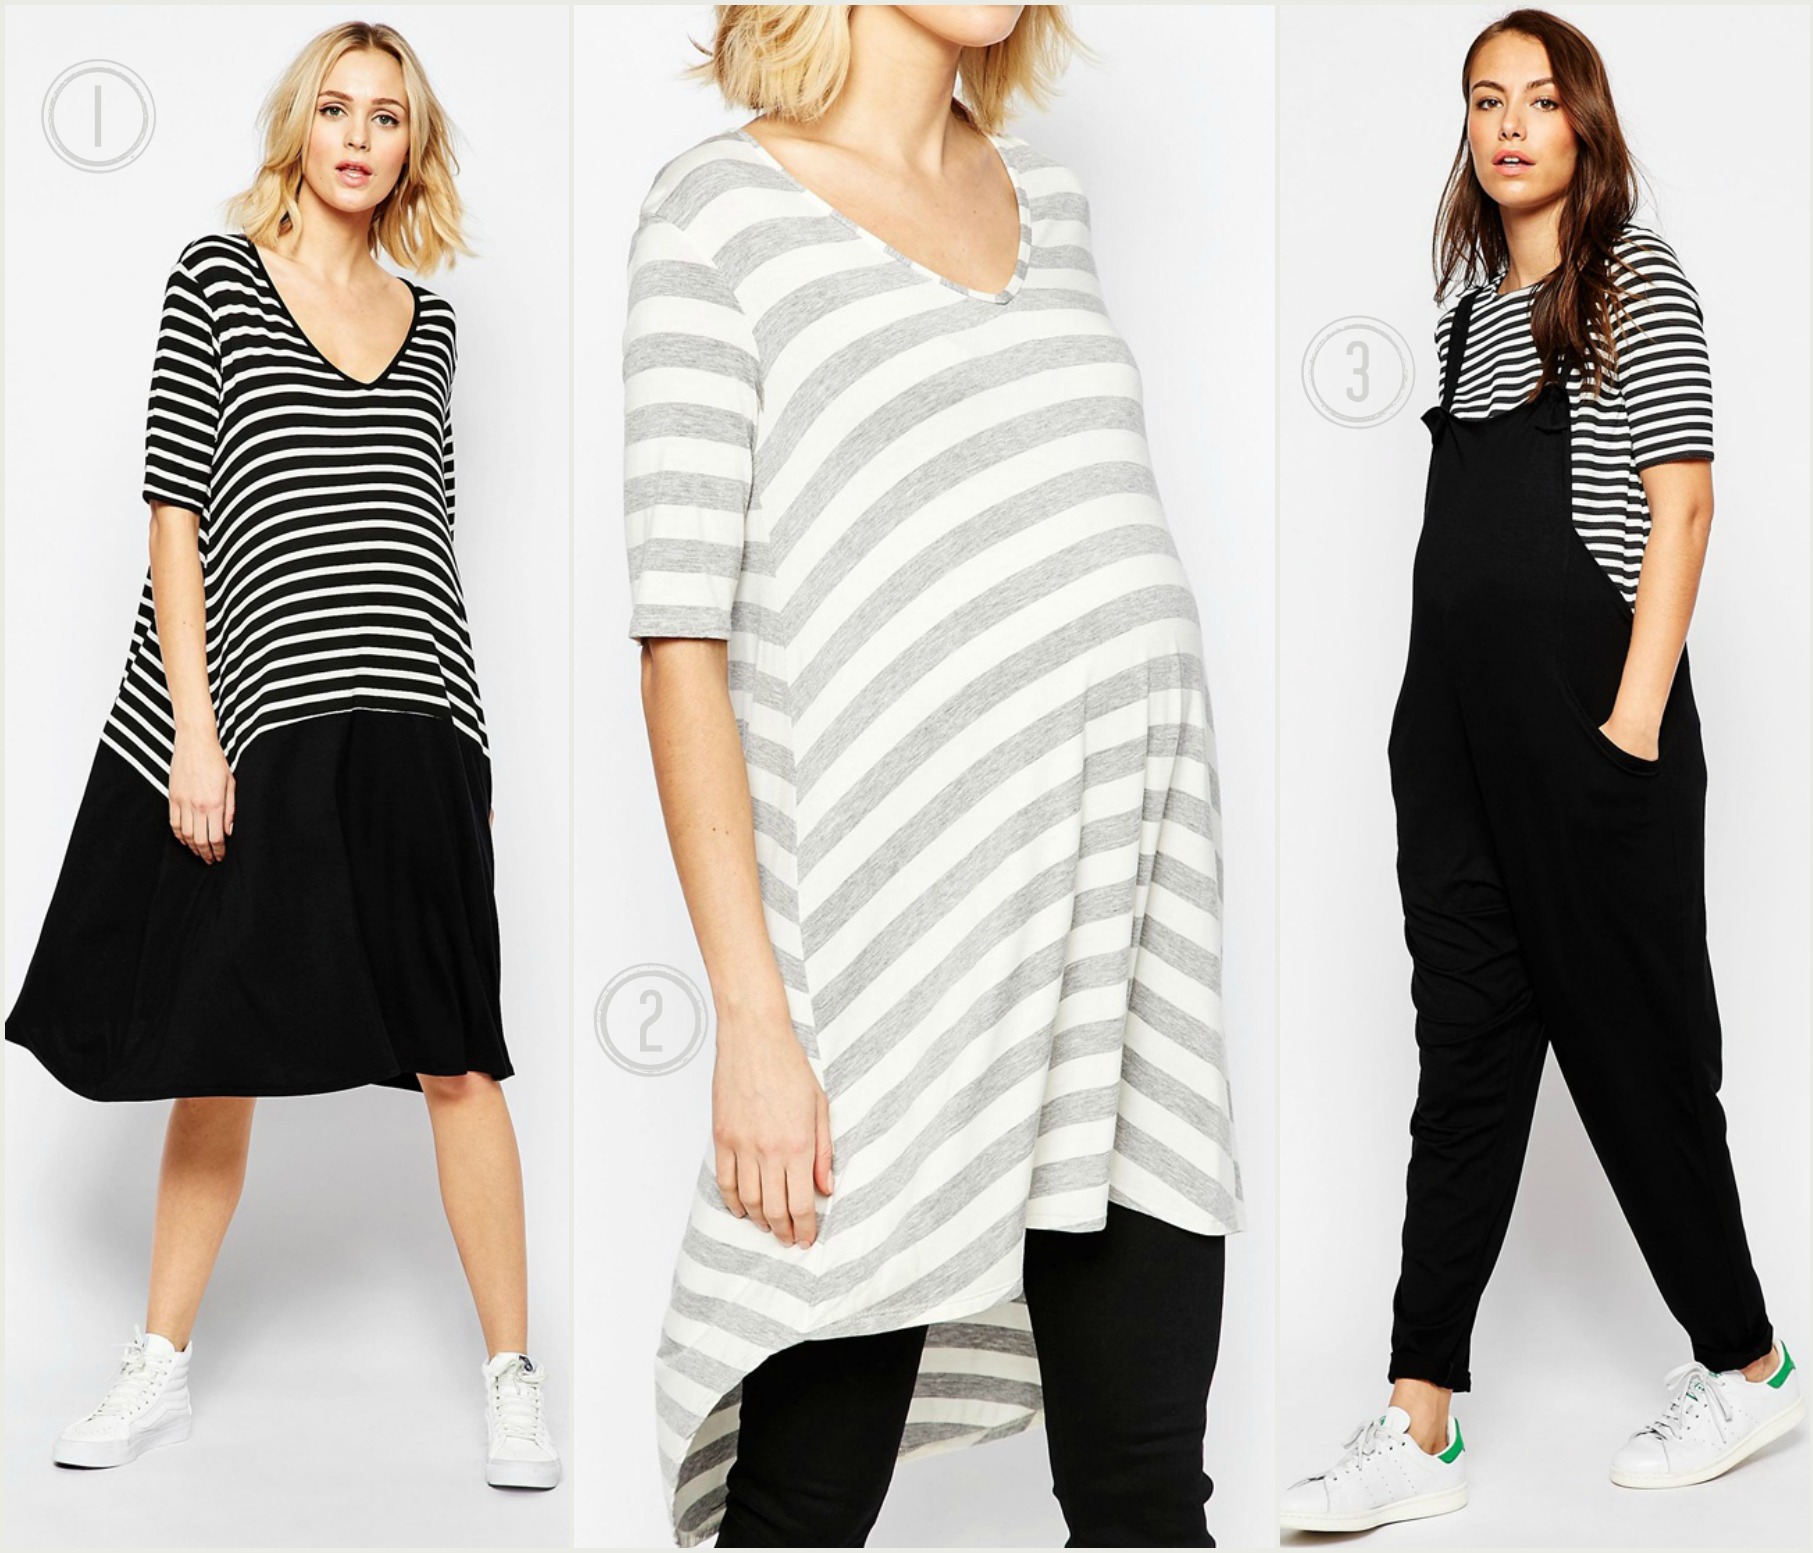 Maternity Wear - Umstandsmode - ASOS Maternity